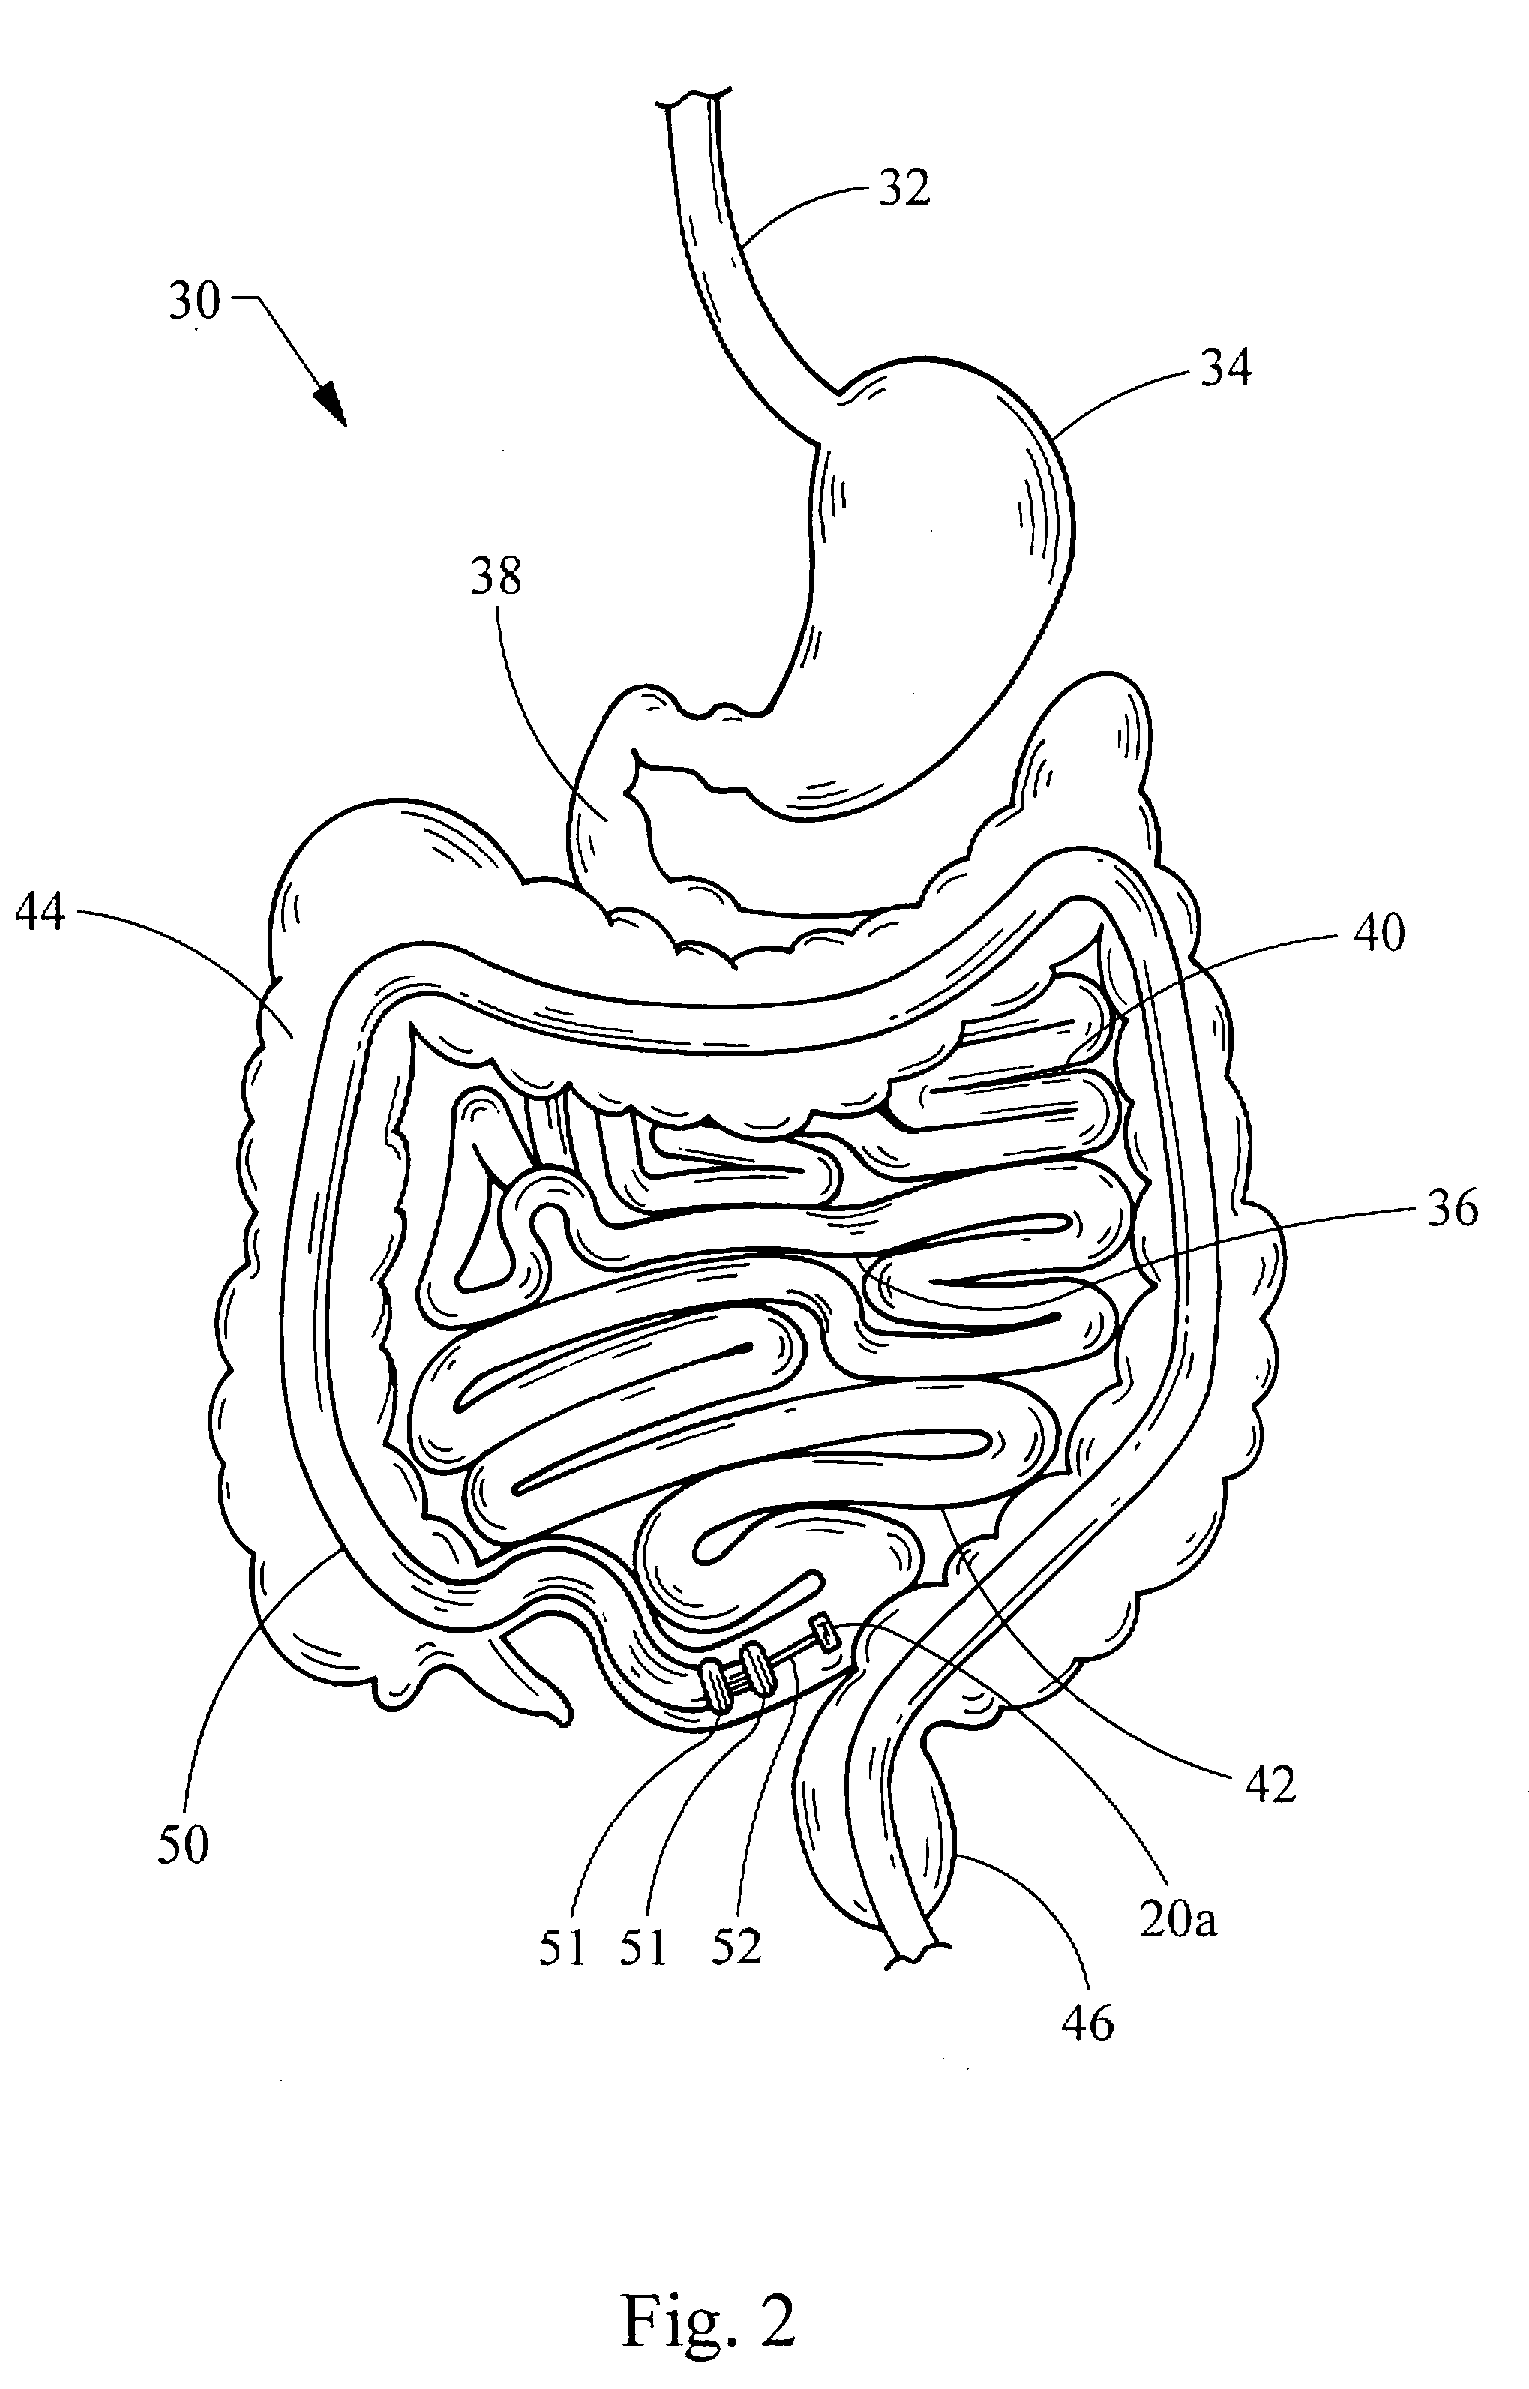 Intestinal bypass using magnets